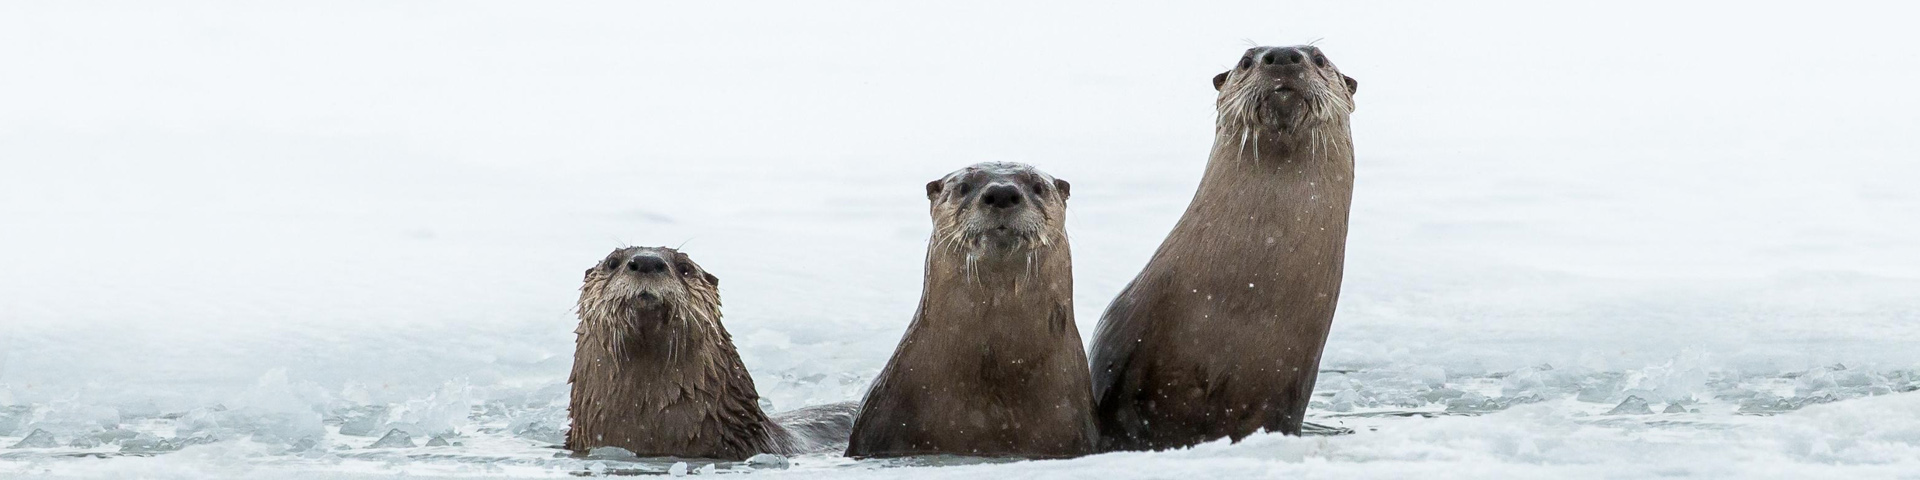 Three river otters in icy water